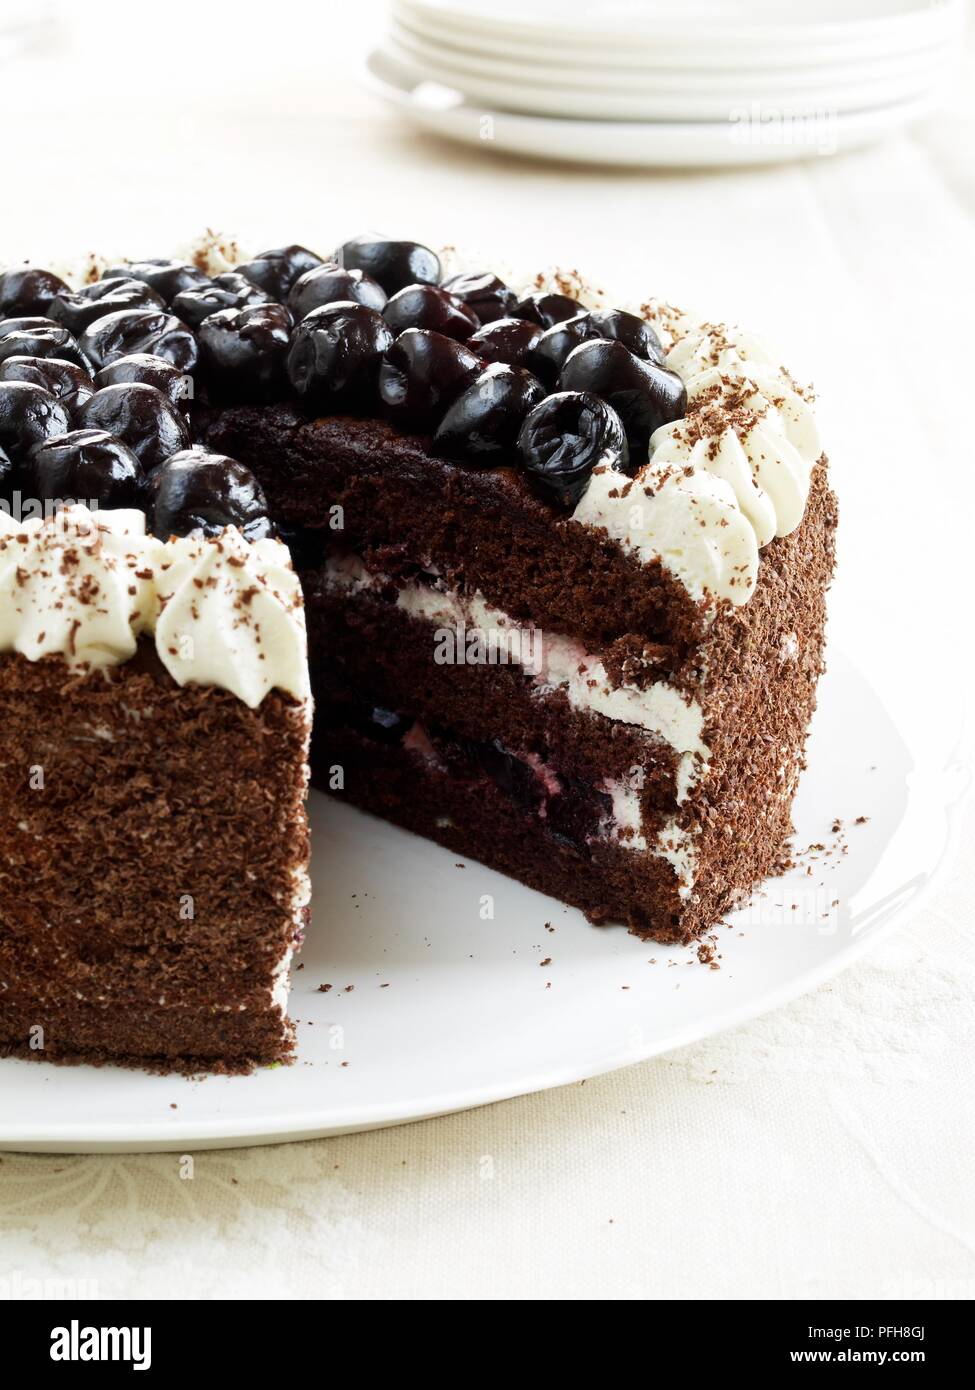 Black Forest Gateaux, decorated with chocolate, cherries and cream, with a slice cut away, stack of plates nearby, close-up Stock Photo